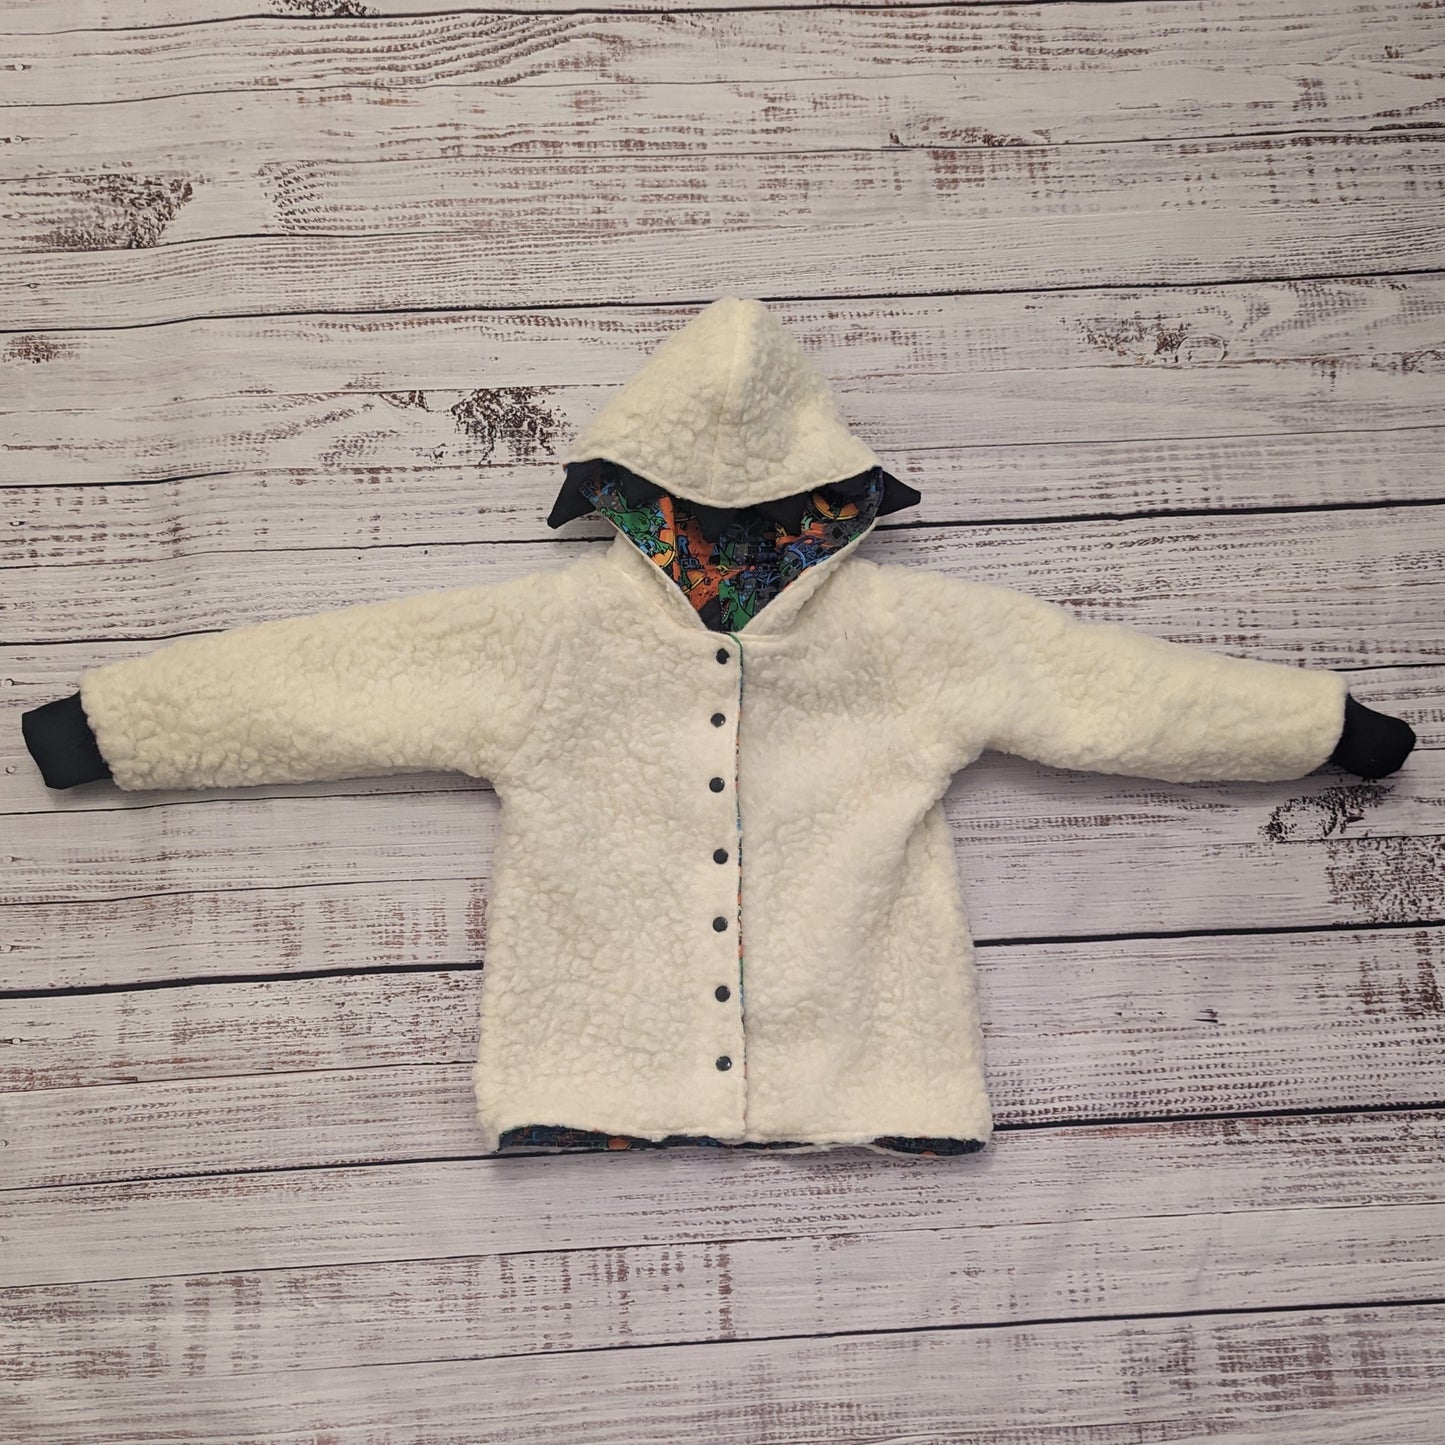 The ferociously cool street Dino reversible coat, shown with dinosaur teeth and spines for added fun. Handmade using street dino cotton French terry, black cotton ribbing and sherpa fur. Showing the reverse as a sherpa fur hoodie.